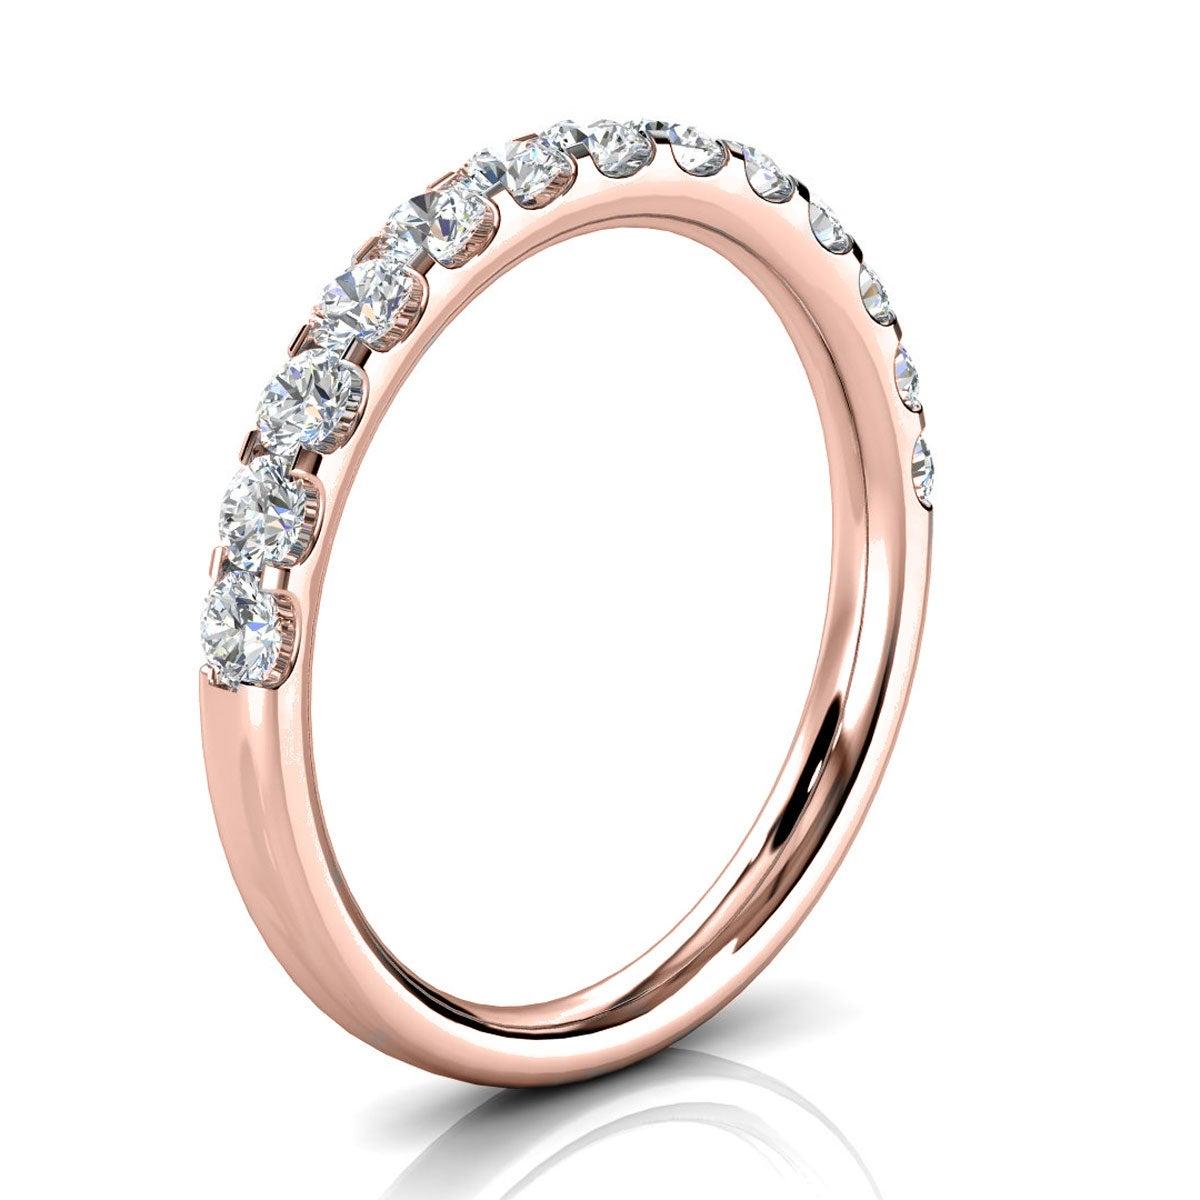 For Sale:  14K Rose Gold Valerie Micro-Prong Diamond Ring '1/2 Ct. tw' 2